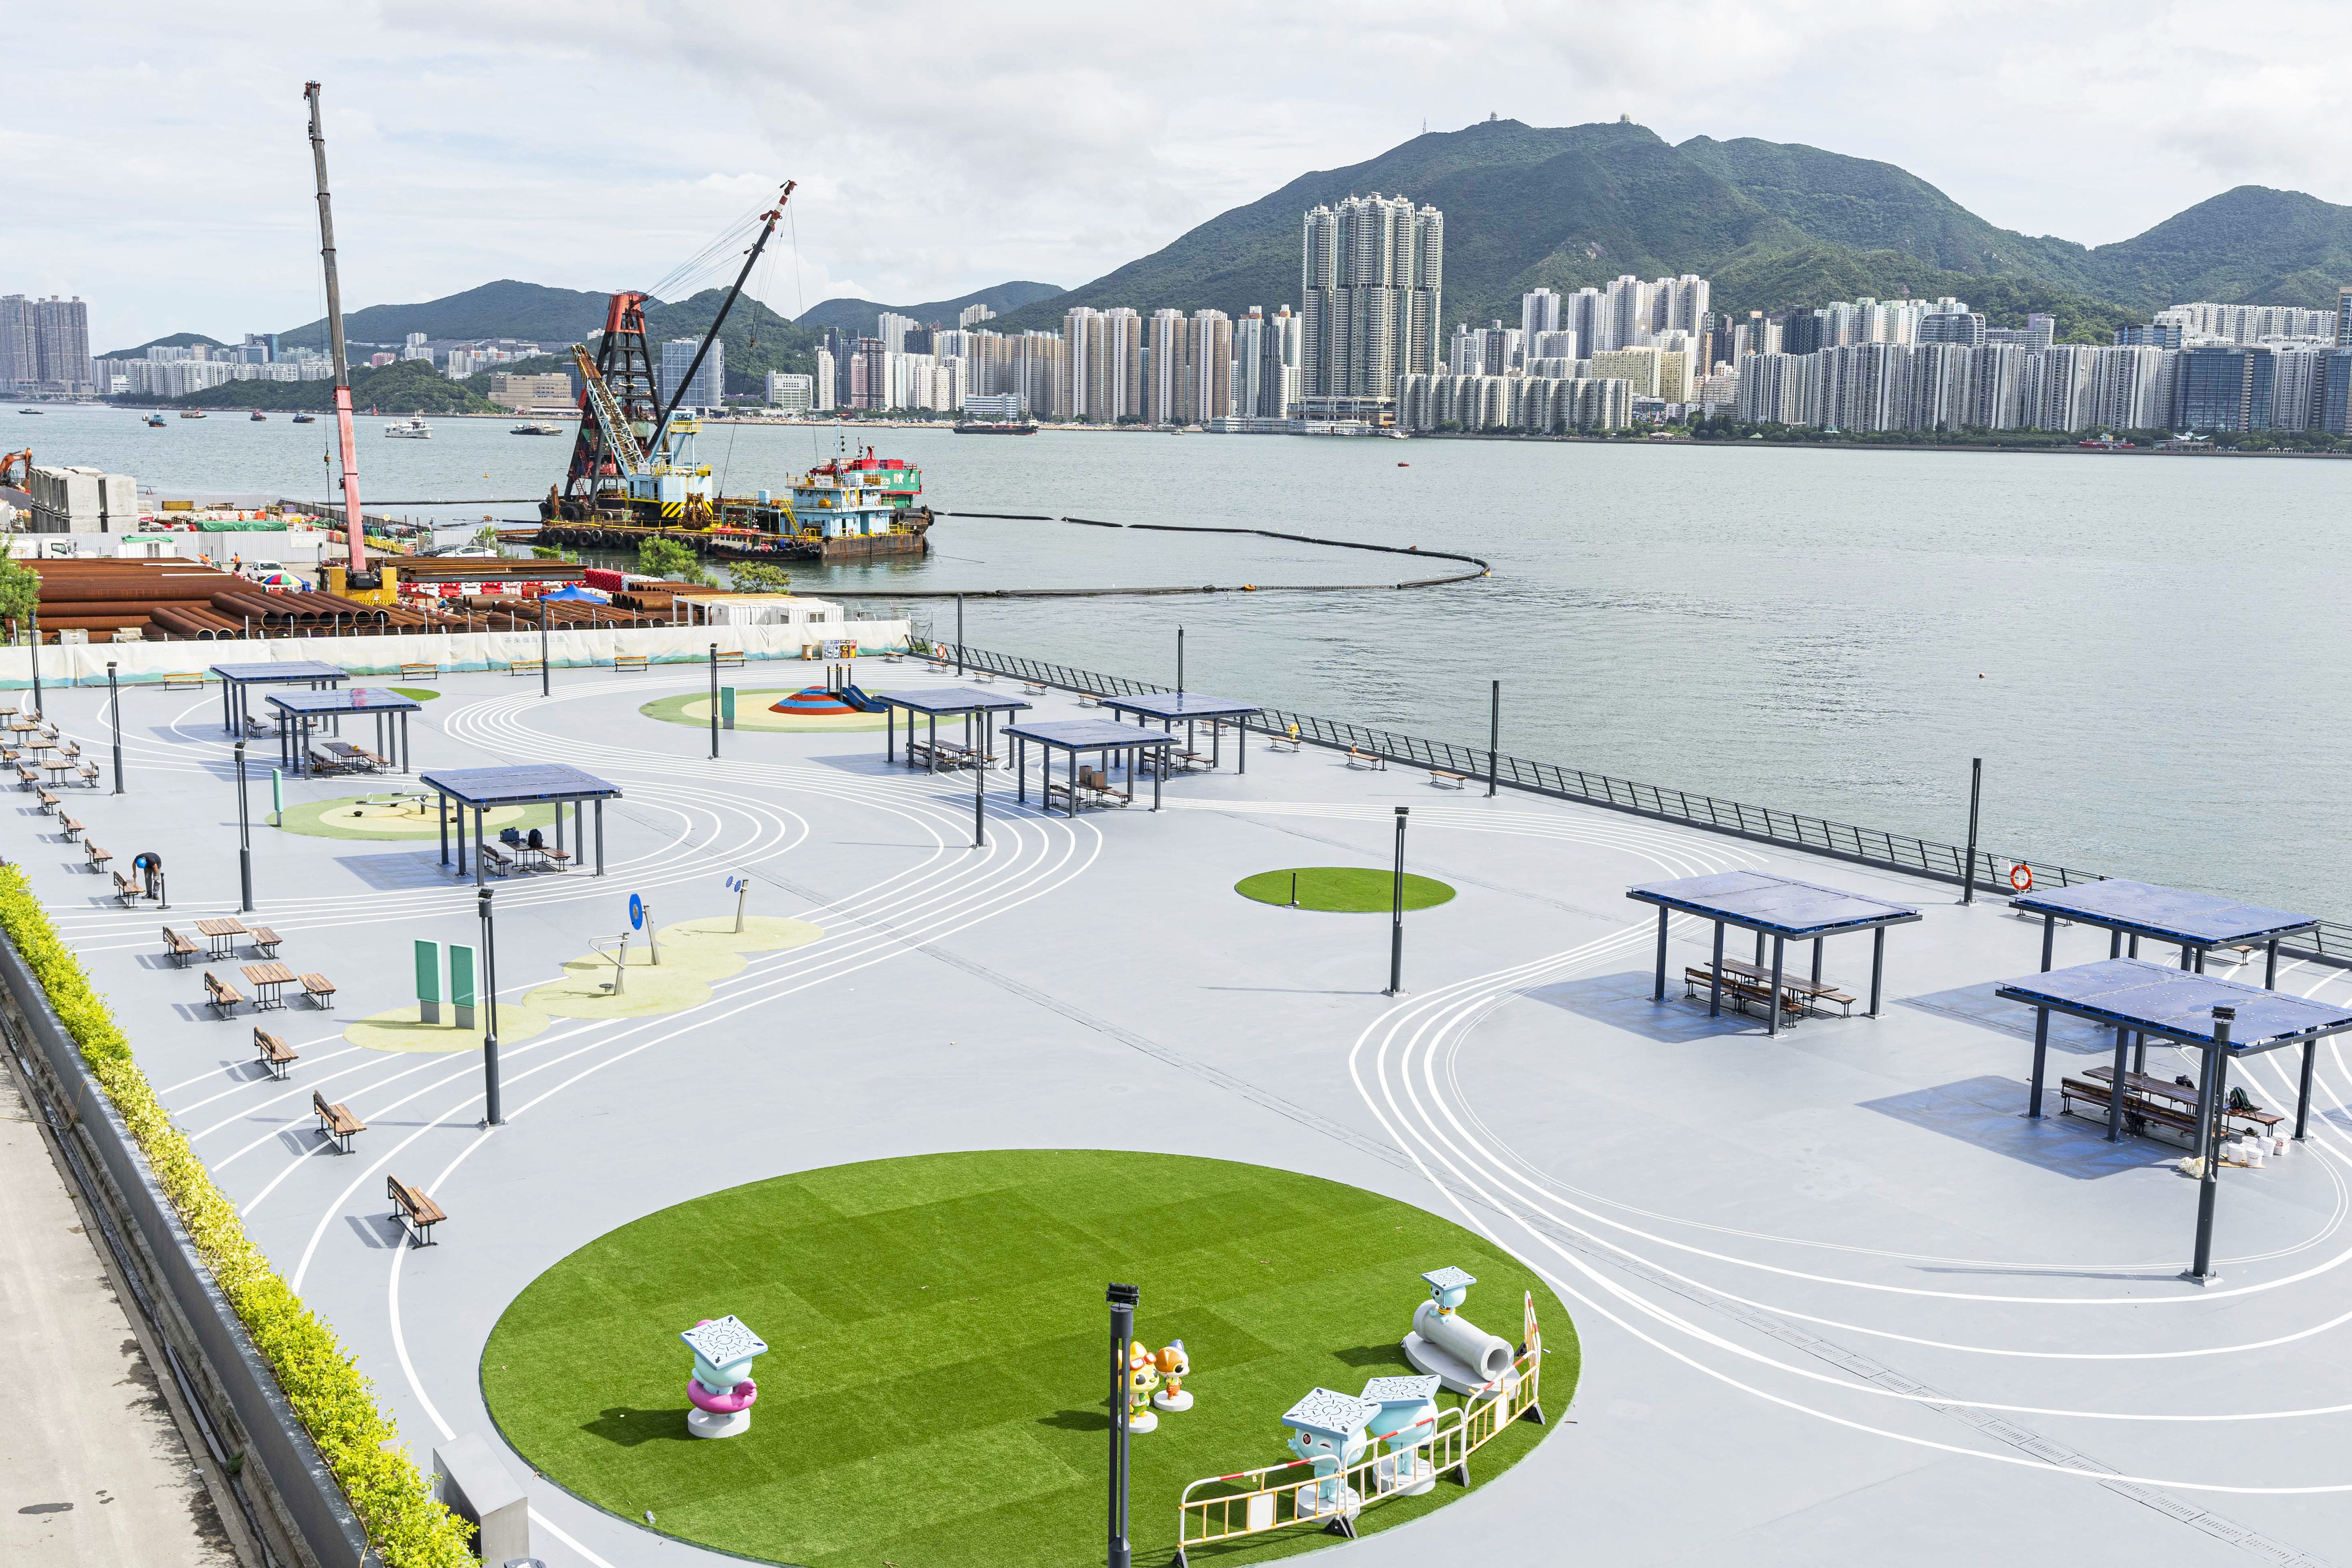 The Cha Kwo Ling Promenade and Tsui Ping Seaside officially opened today (August 24). Photo shows recreational facilities at the seaside of Victoria Harbour.